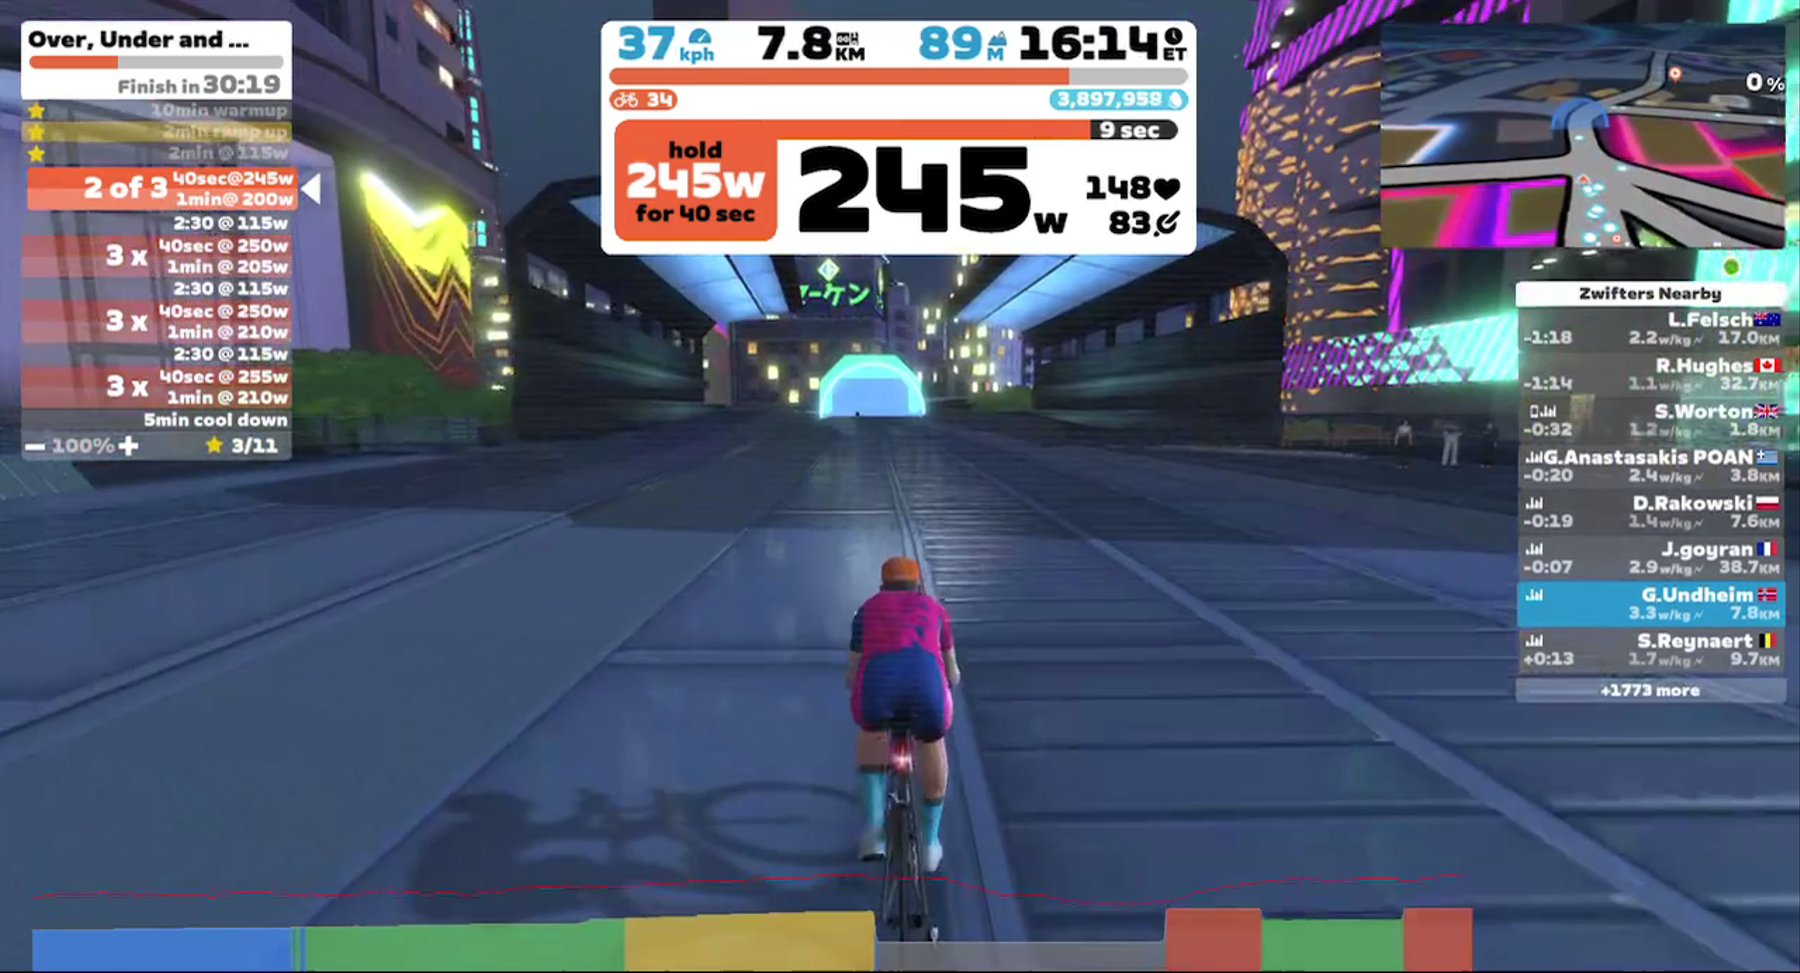 Zwift - Over, Under and Beyond on Tick Tock in Makuri Islands